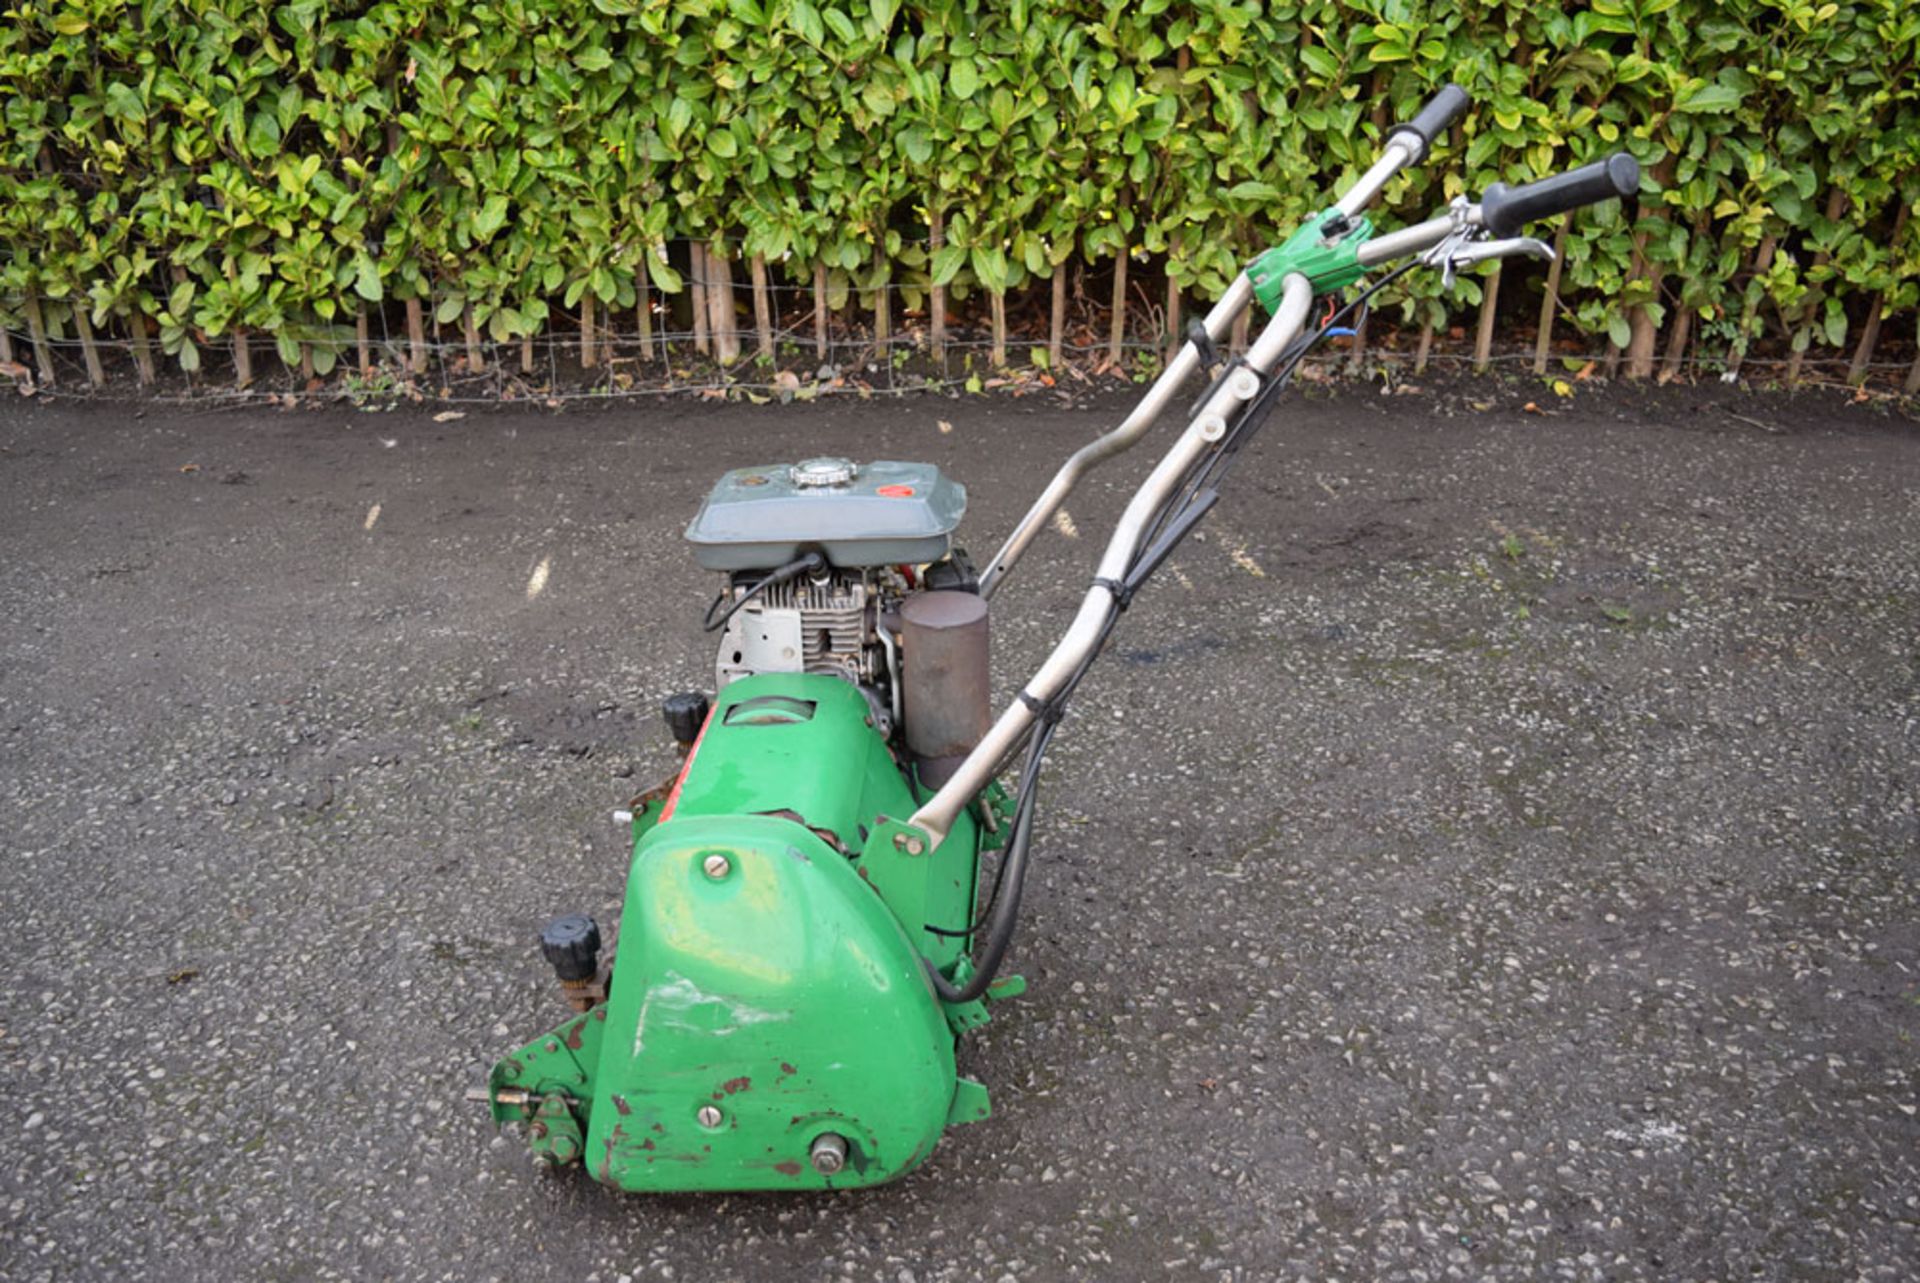 Ransomes GreensPro 20 10 Blade Cylinder Mower - Image 3 of 7